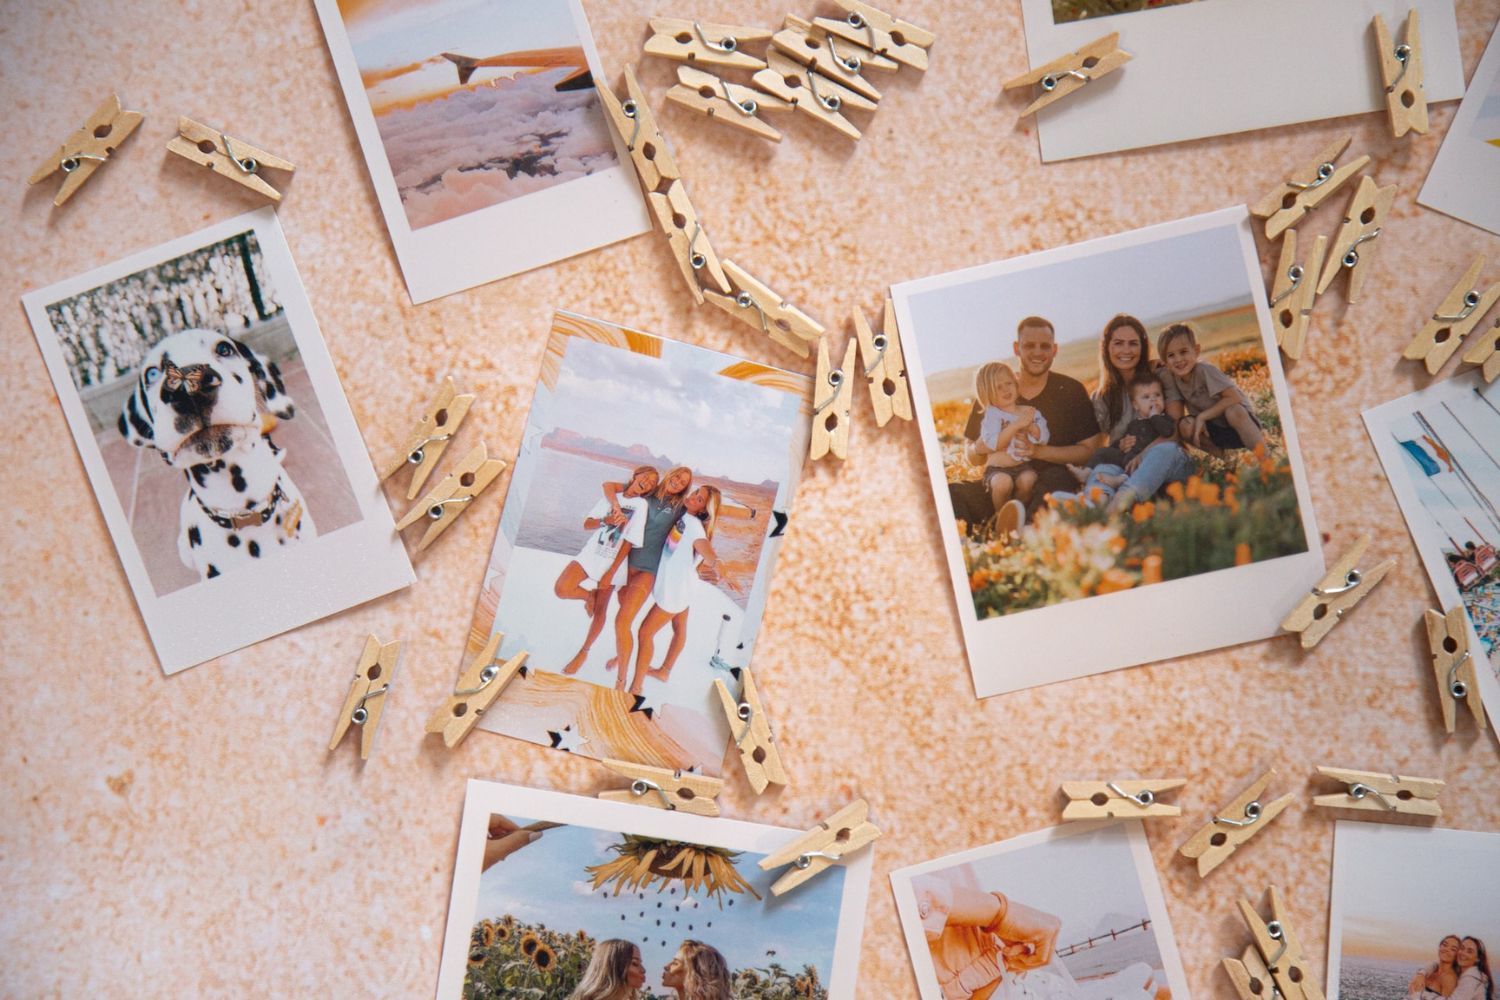 printed photos and wooden clips